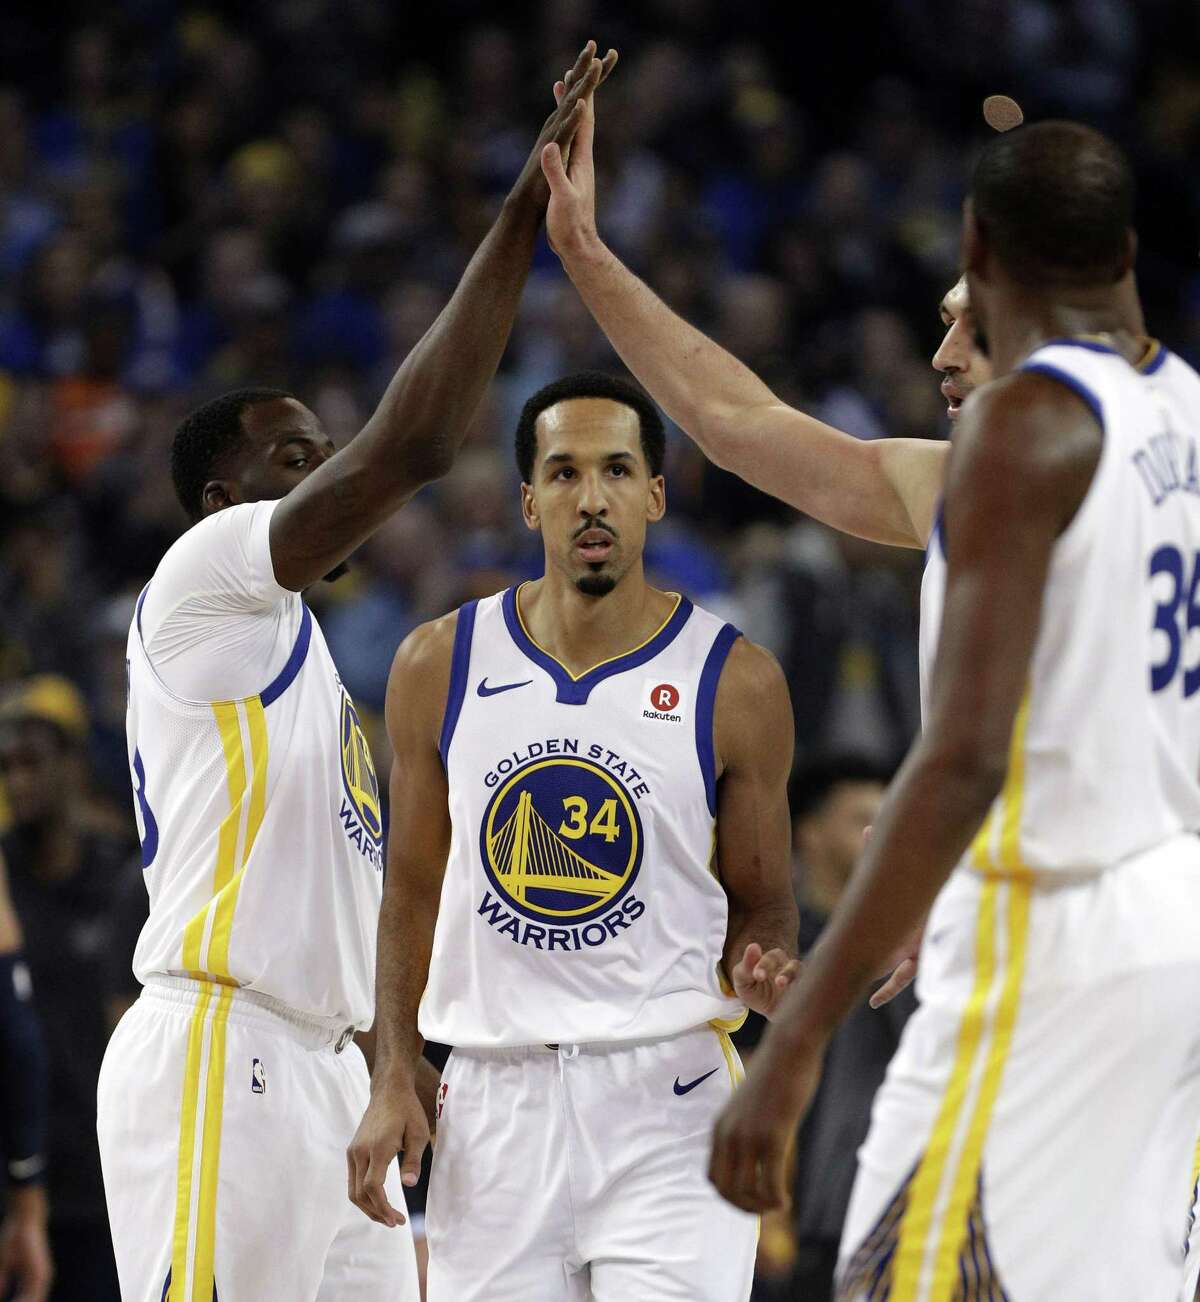 The Warriors high five after a scoring play for Shaun Livingston (34) in the first half as the Golden State Warriors played the Utah Jazz at Oracle Arena in Oakland, Calif., on Wednesday, December 27, 2017.